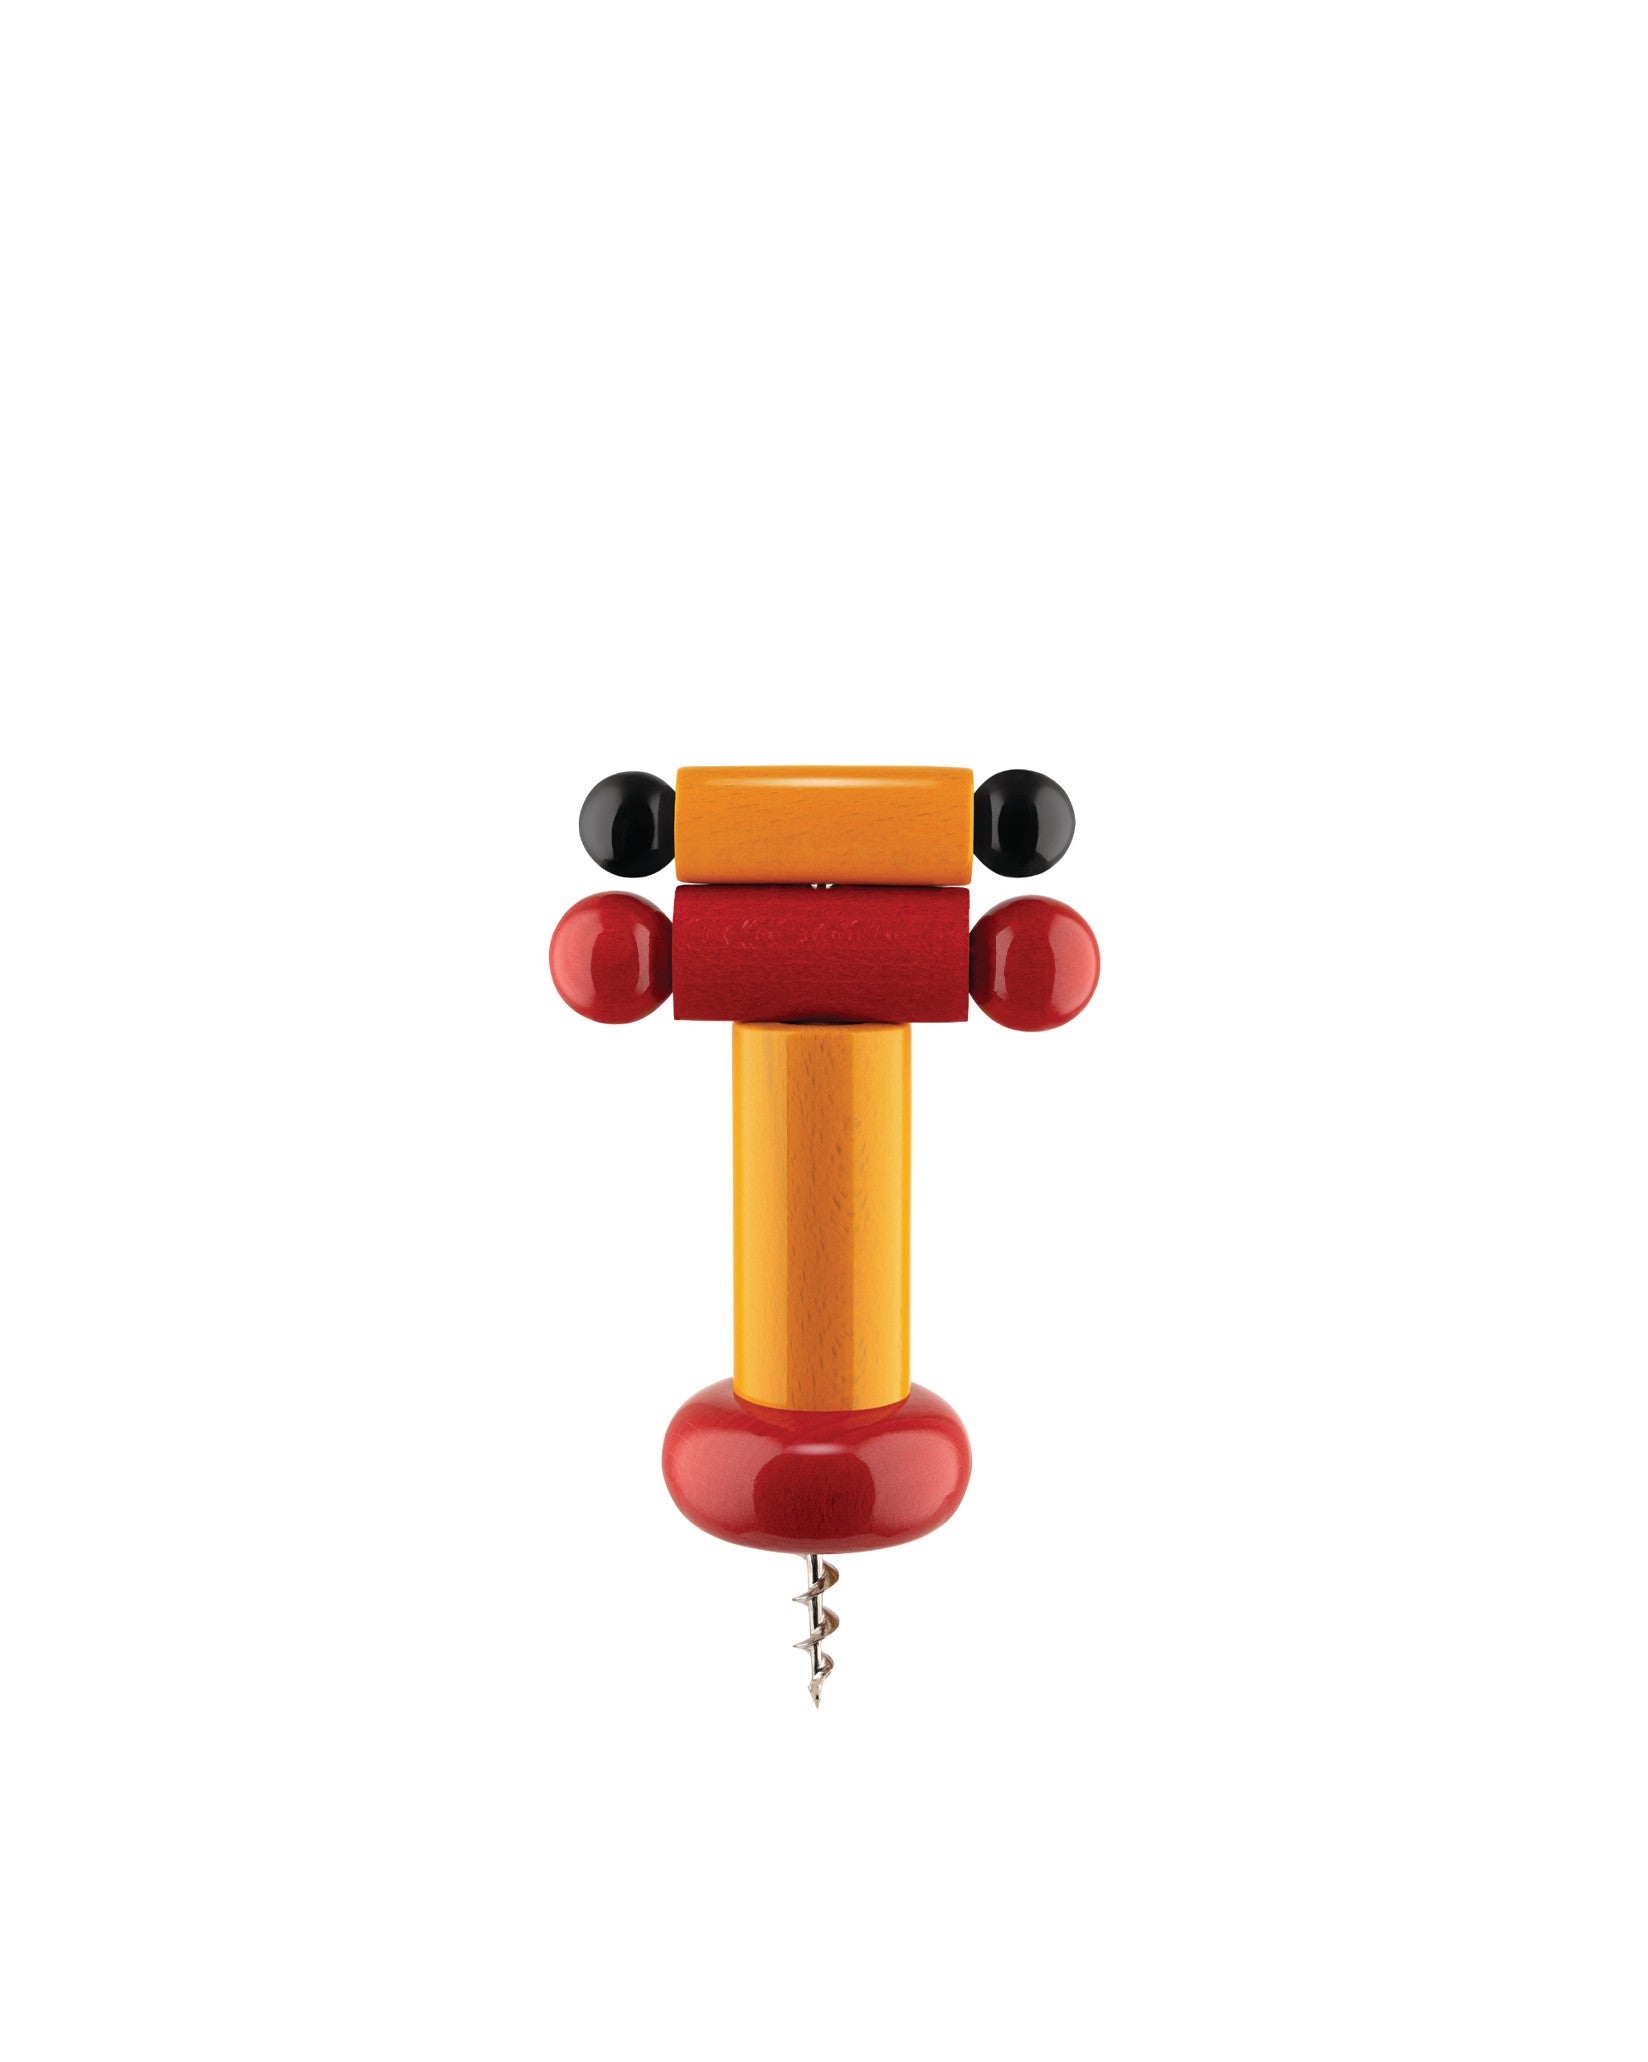 Alessi Ettore Sottsass 100 Values Collection centrepiece - Orange